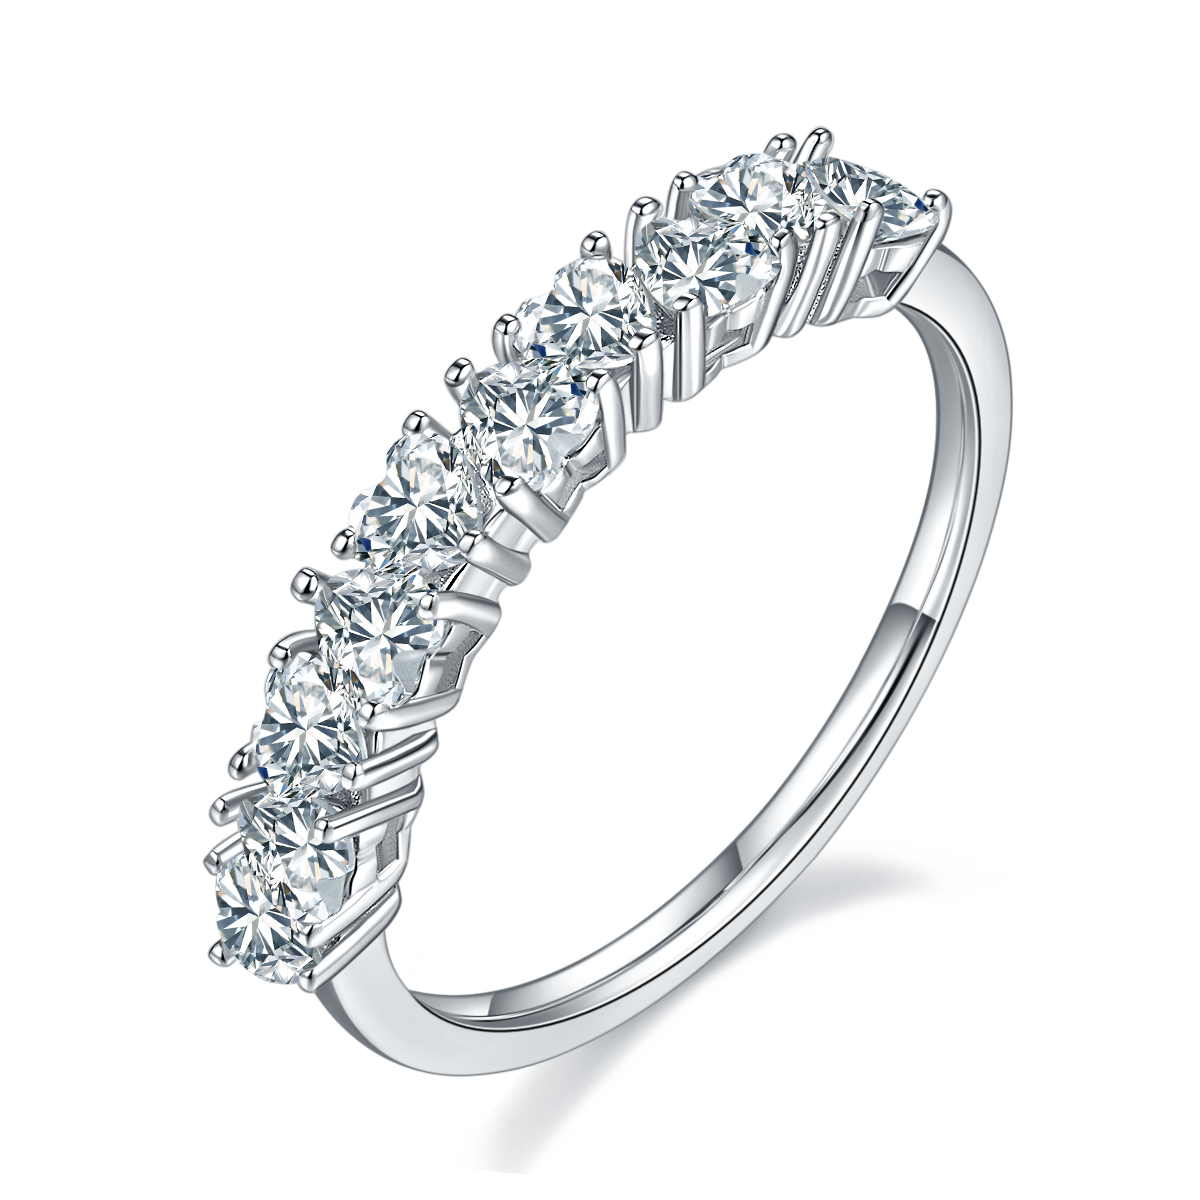 A silver half eternity wedding ring set with several heart cut moissanites set in alternating directions.